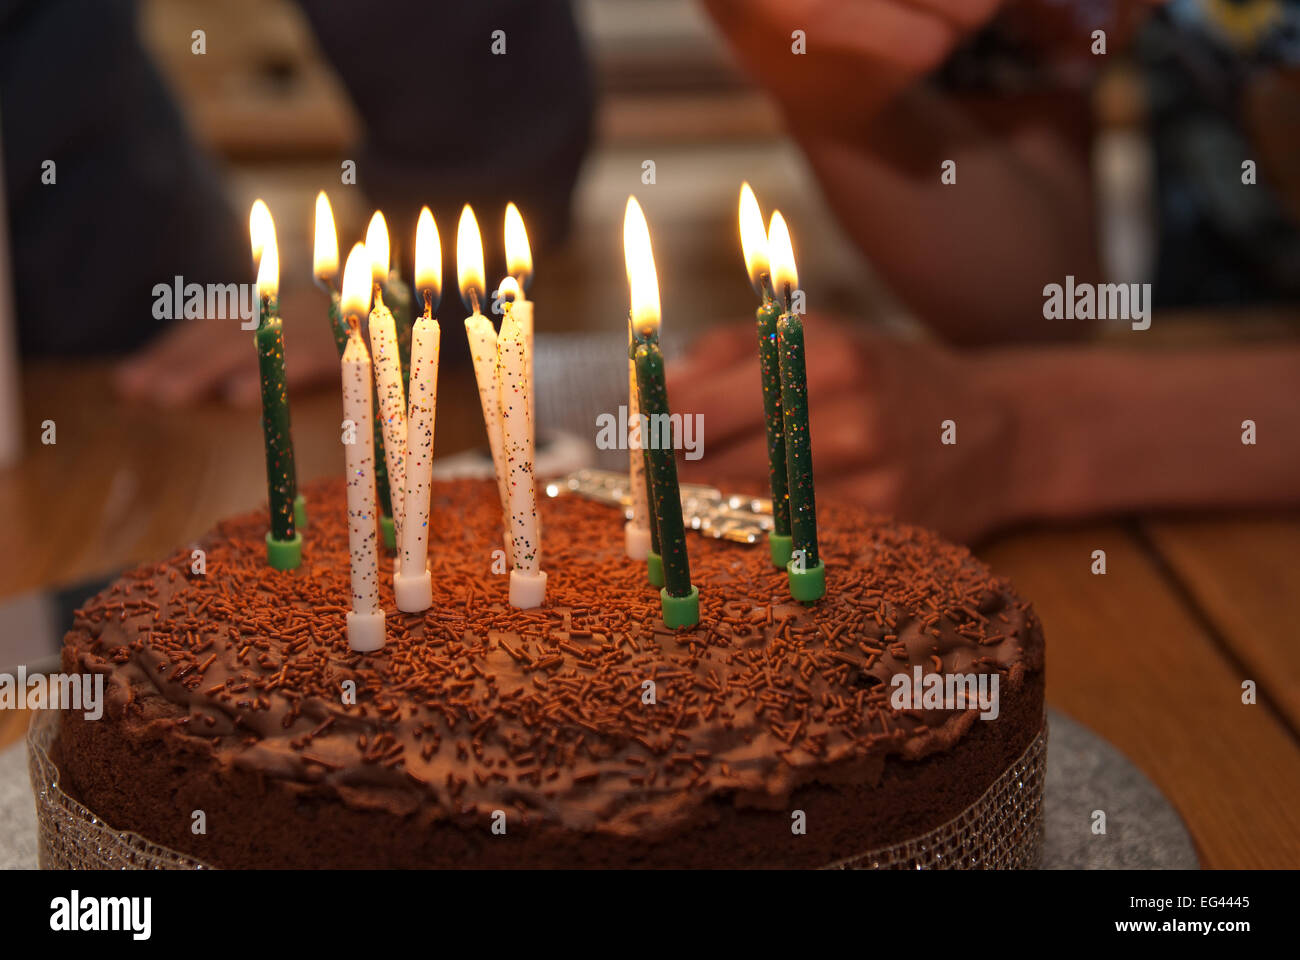 thirteen burning candles on a homemade chocolate birthday sponge cake covered in chocolate and candy sprinkles Stock Photo